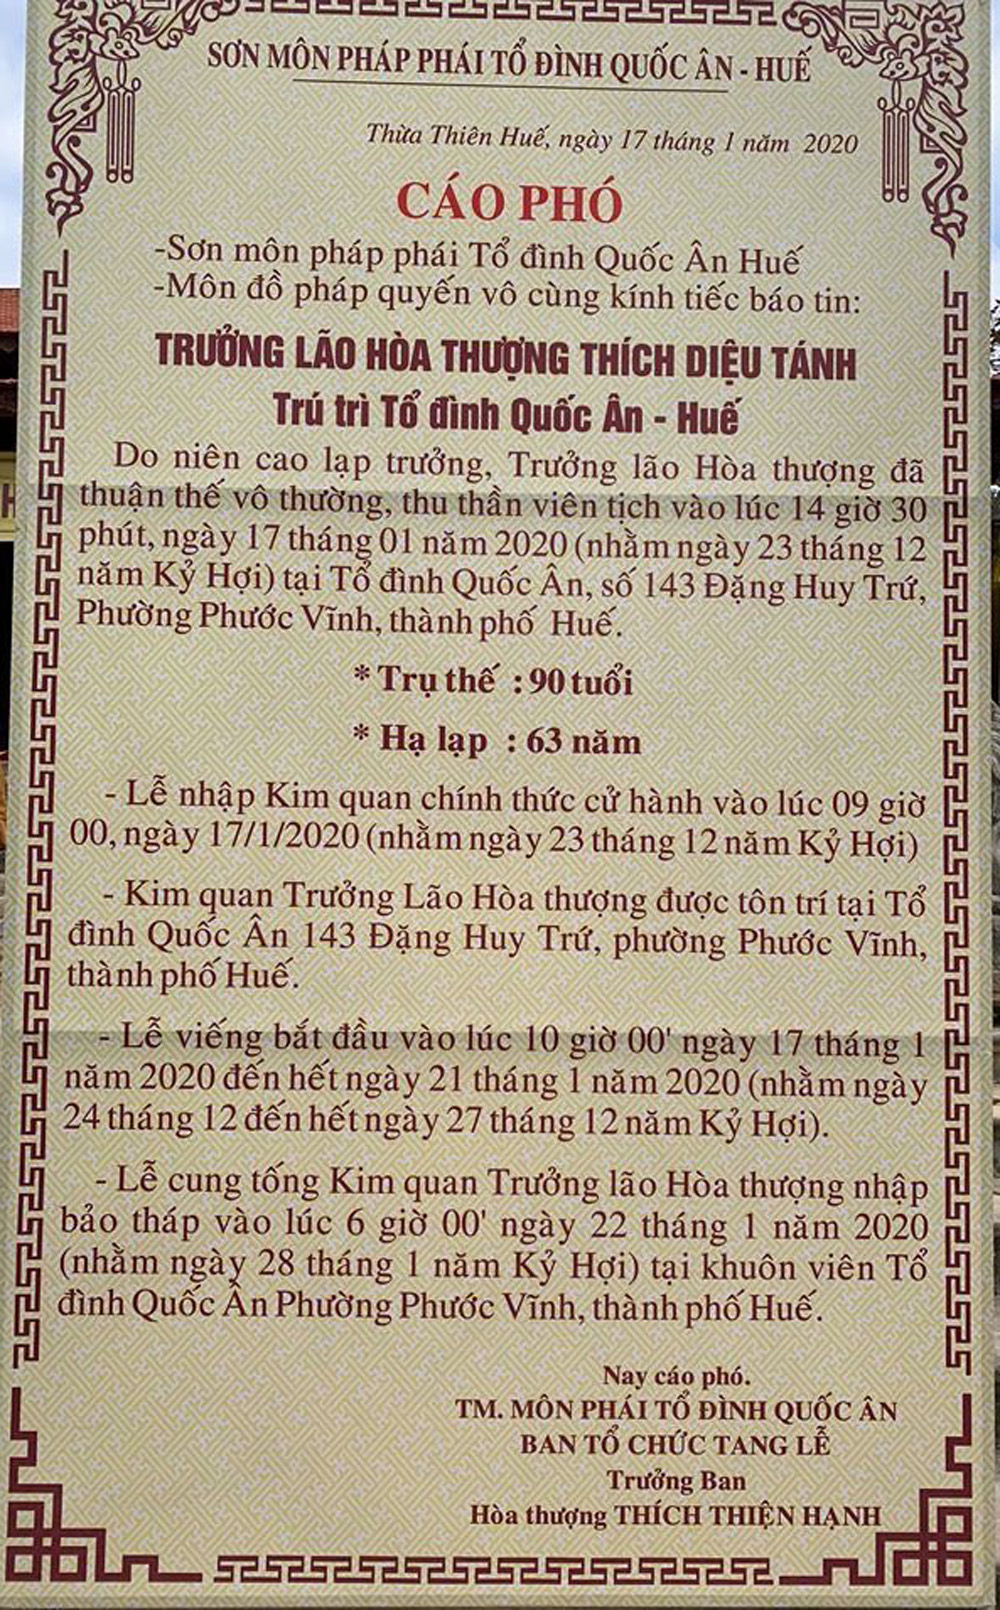 cao pho-tang le-ht thich dieu tanh